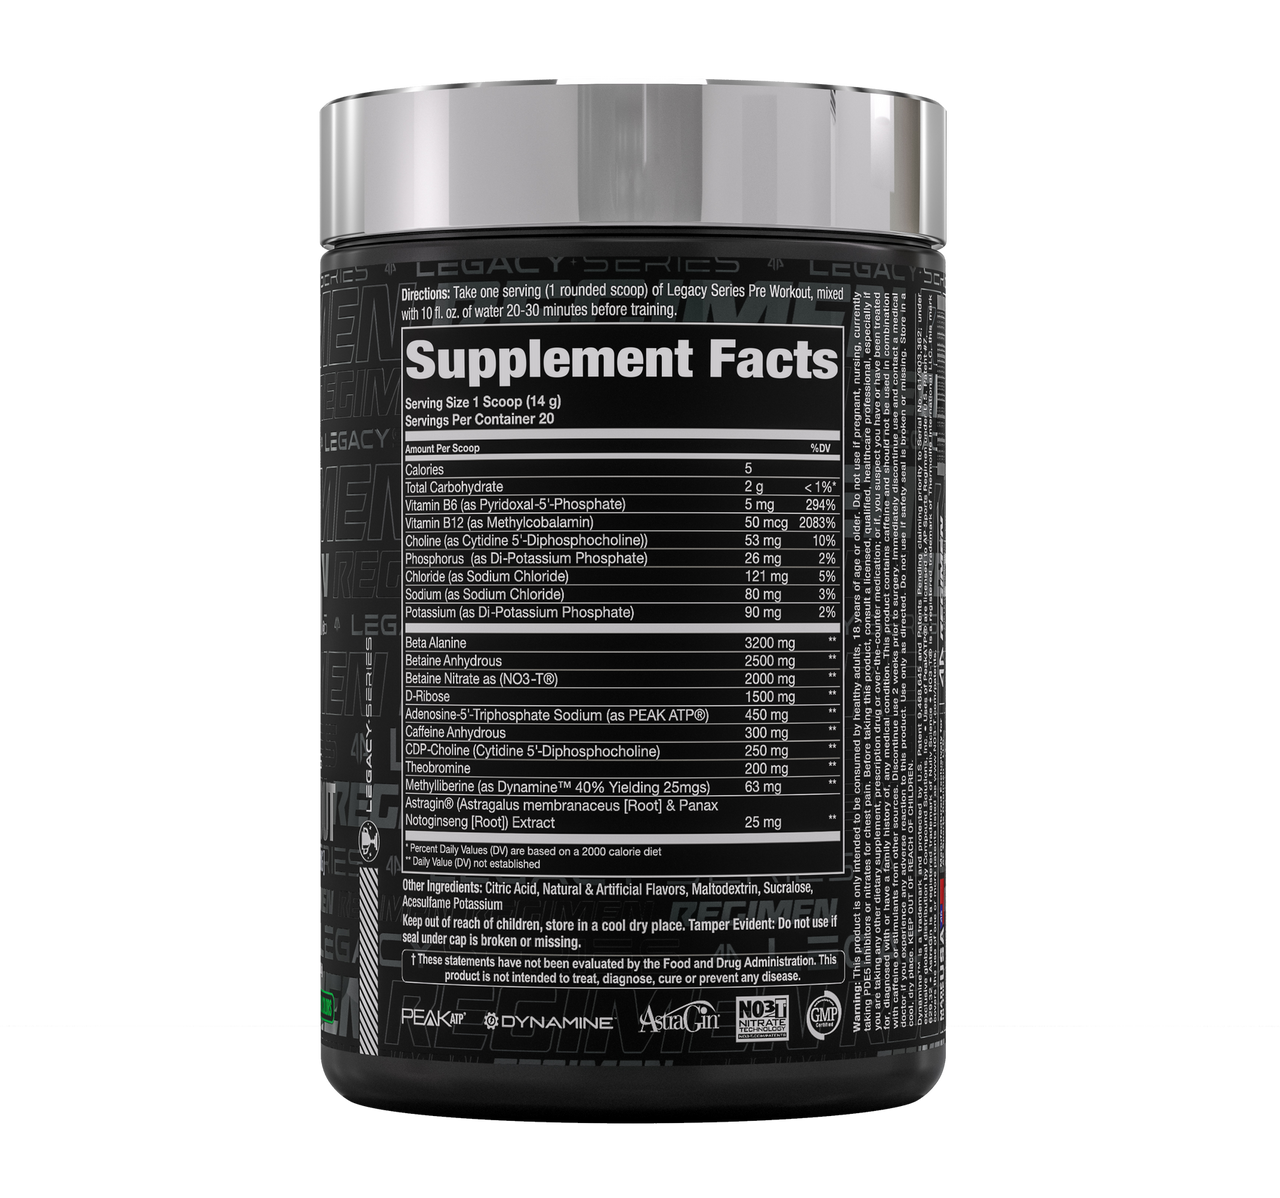 Alpha Prime Legacy Pre-Workout Supplement Facts